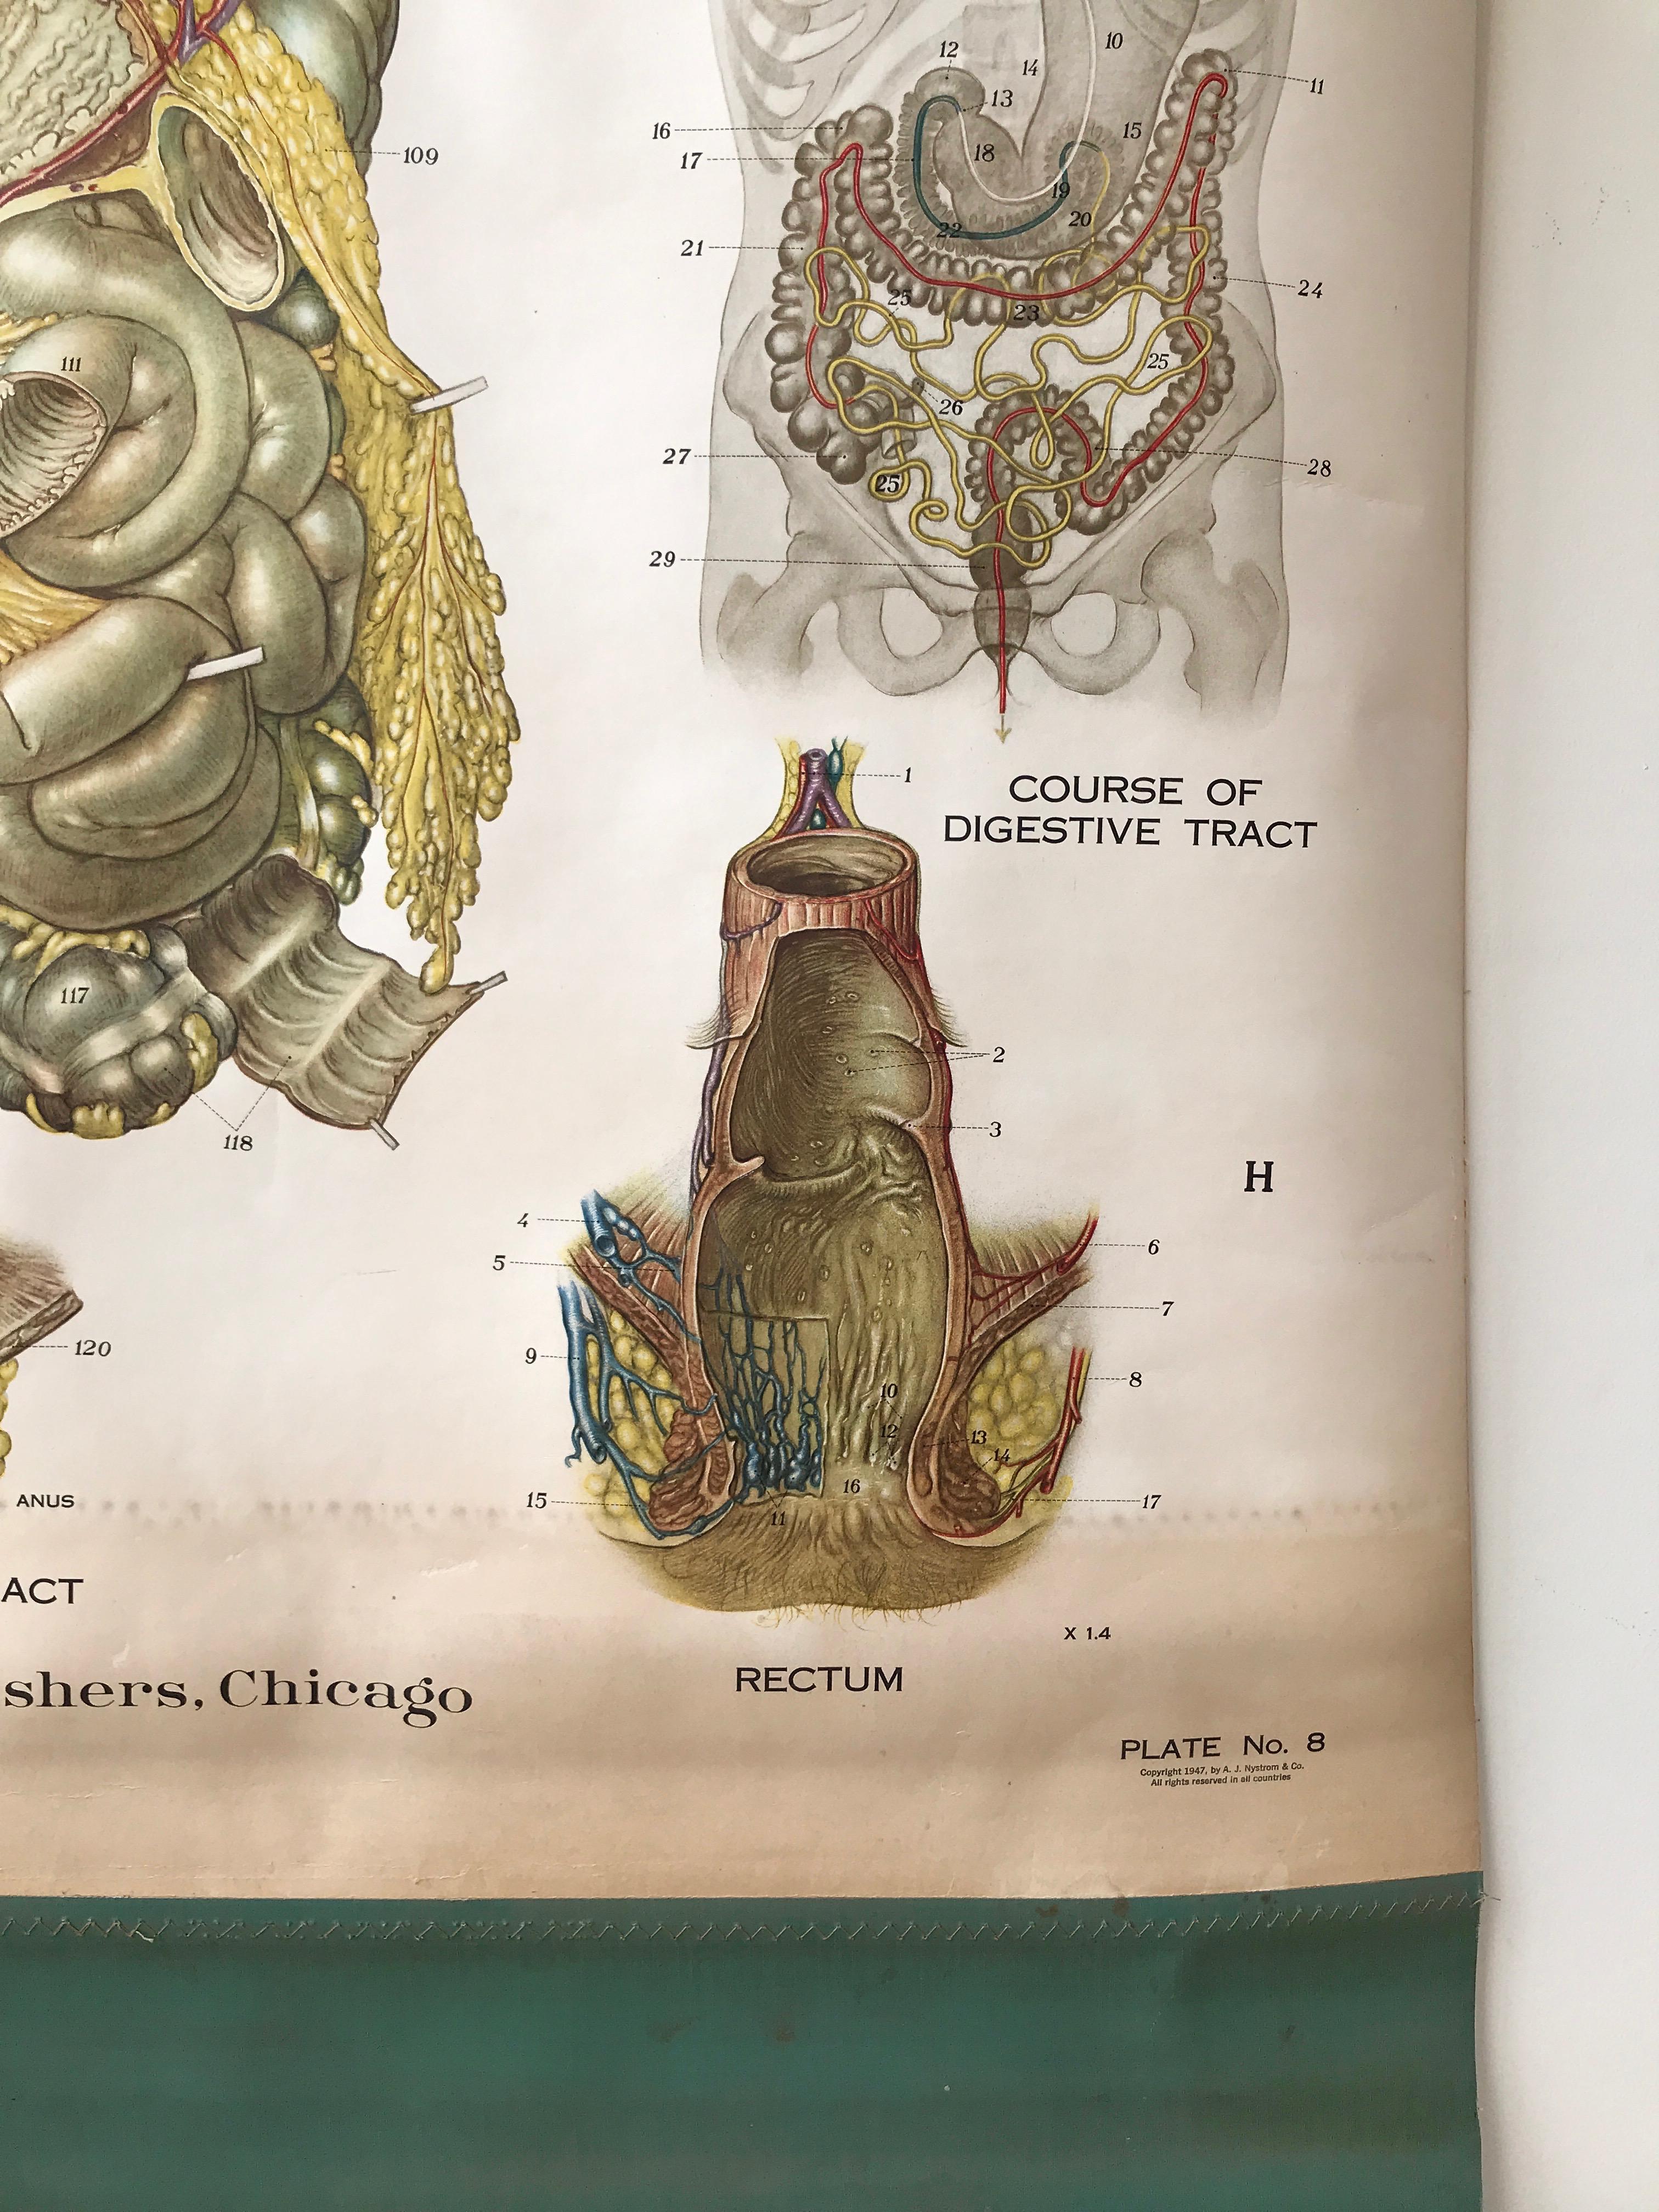 Mid-20th Century Frohse Anatomical Chart by A.J. Nystrom, Plate No. 8: Digestive System, 1947 For Sale